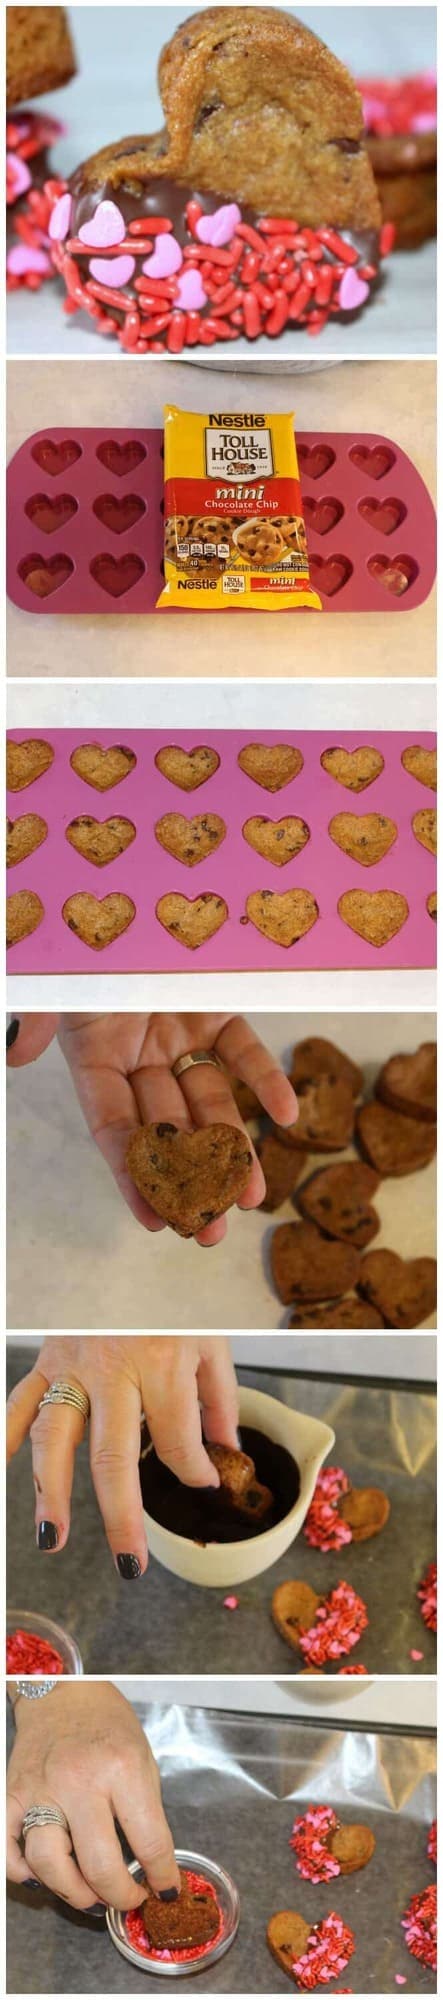 How to make chocolate chip heart cookies for Valentines Day